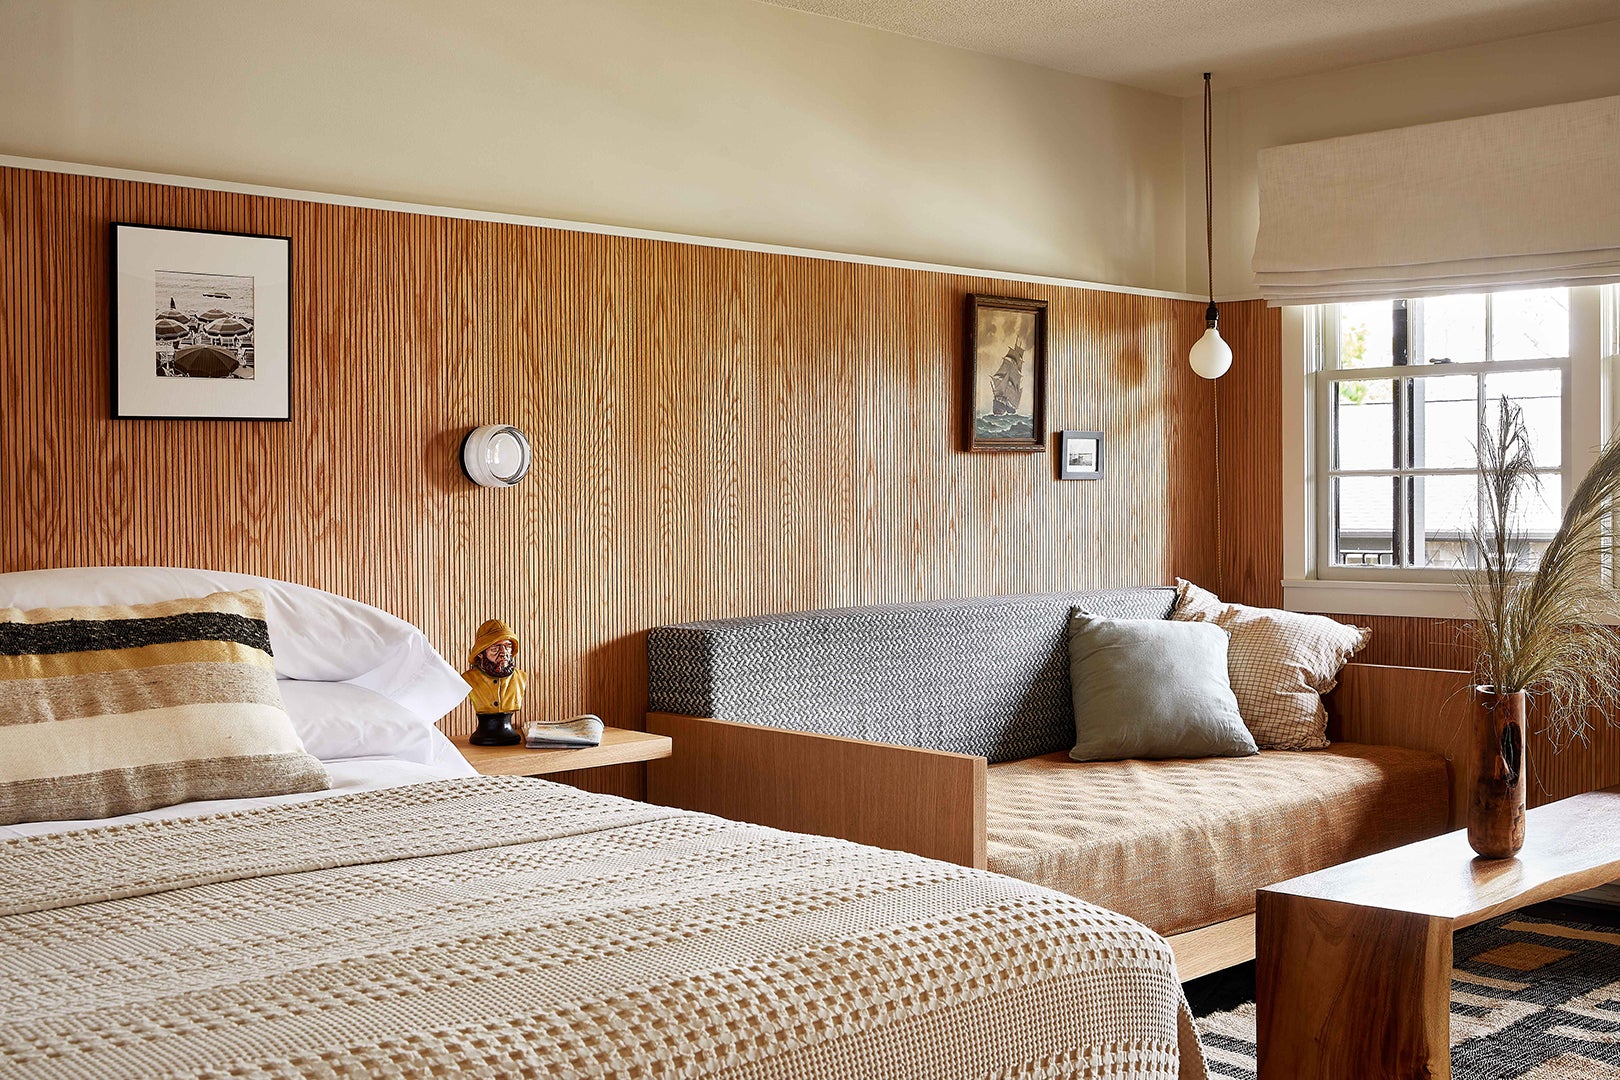 Original Pink Vintage Tile and Knotty Pine Walls Made the Cut in This 1950s Motel Reno